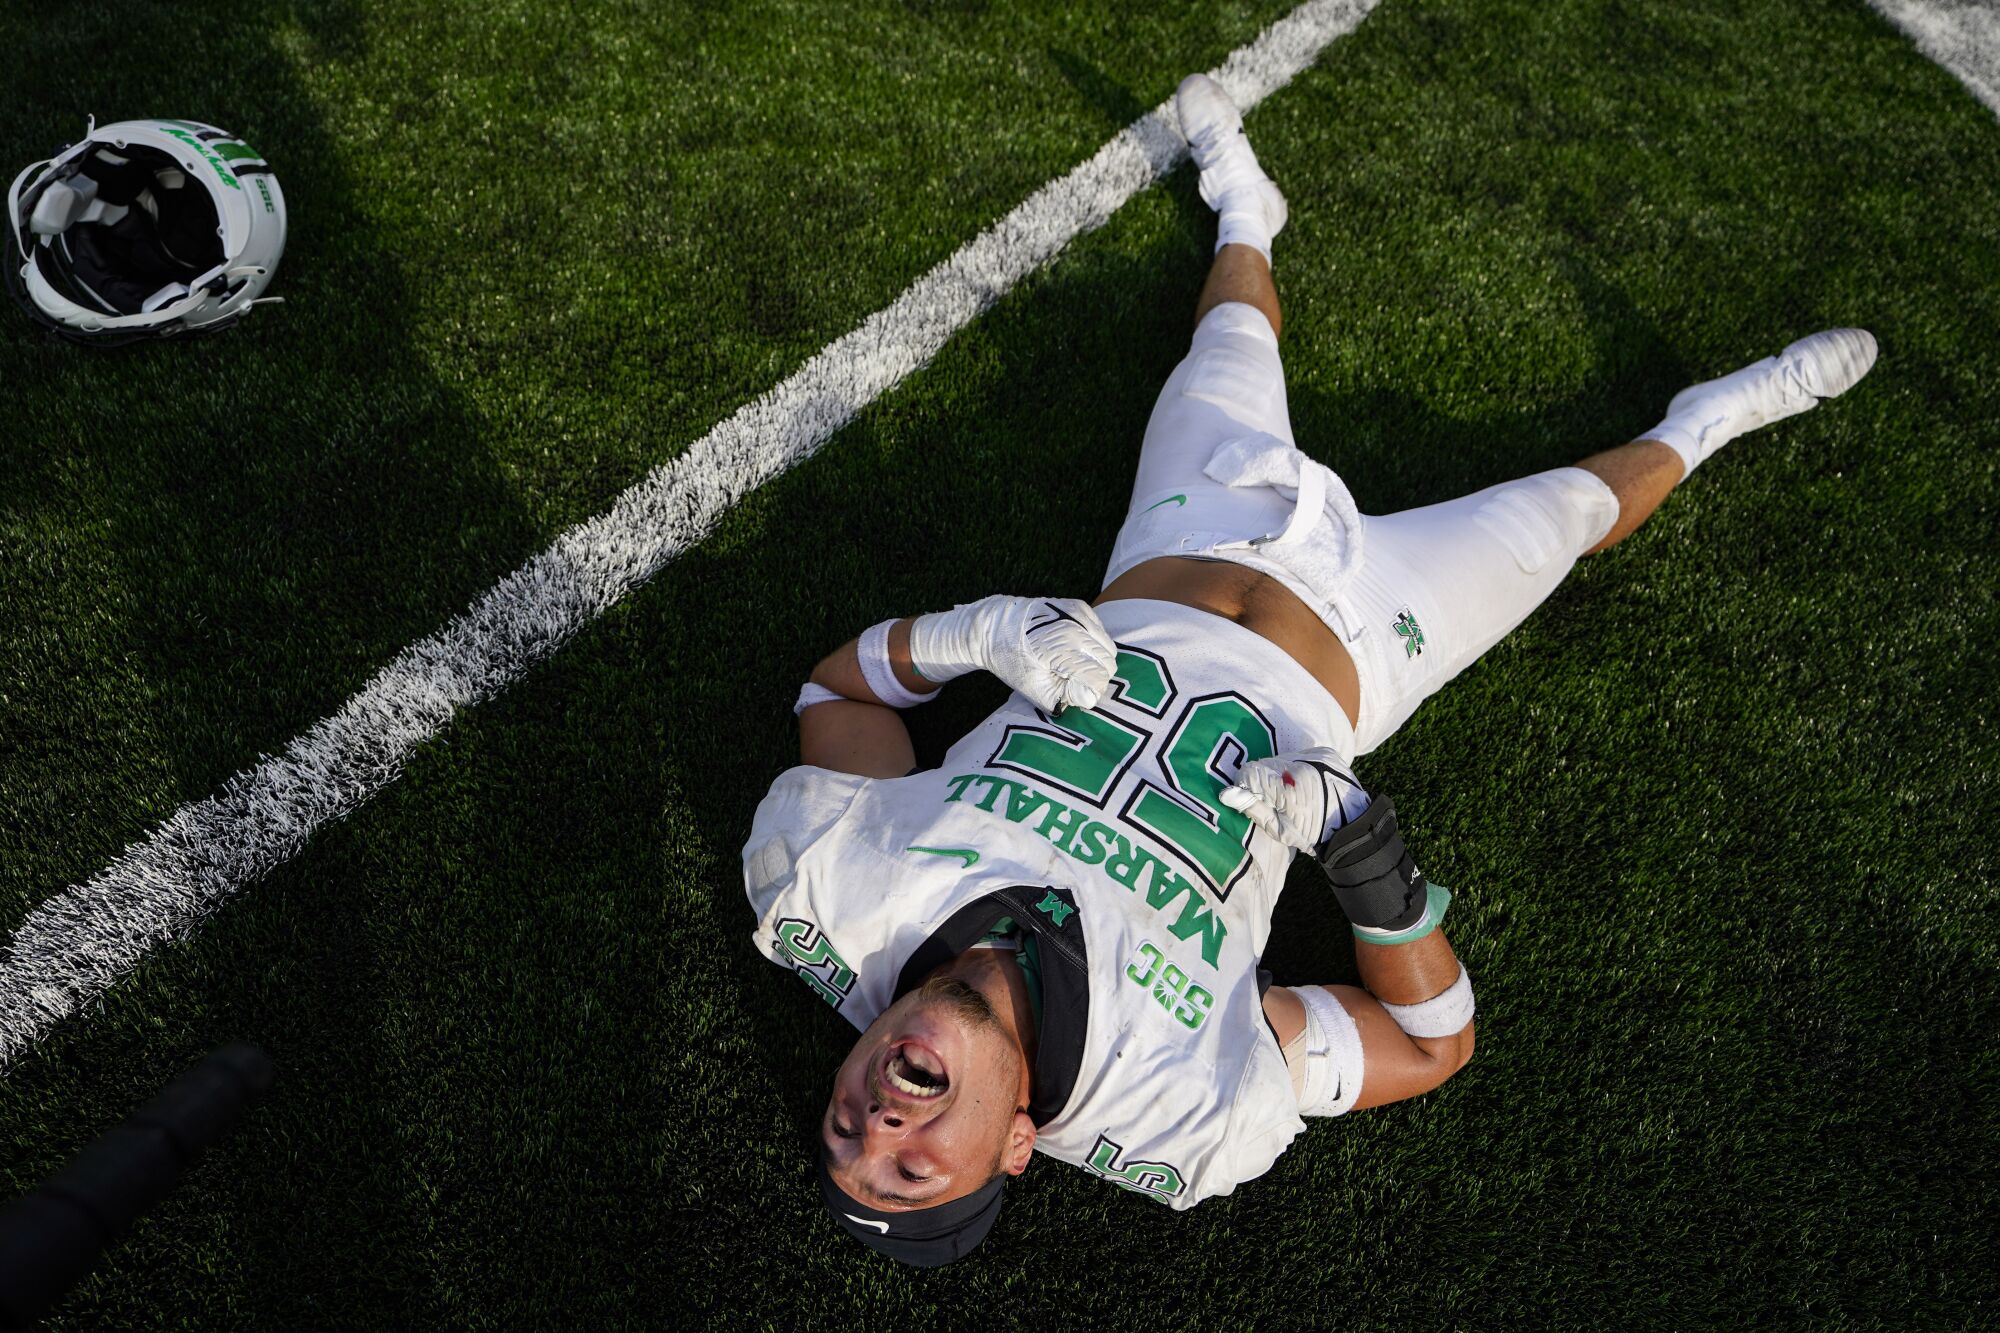 Marshall defensive lineman Owen Porter celebrates as he lays down on a green field.